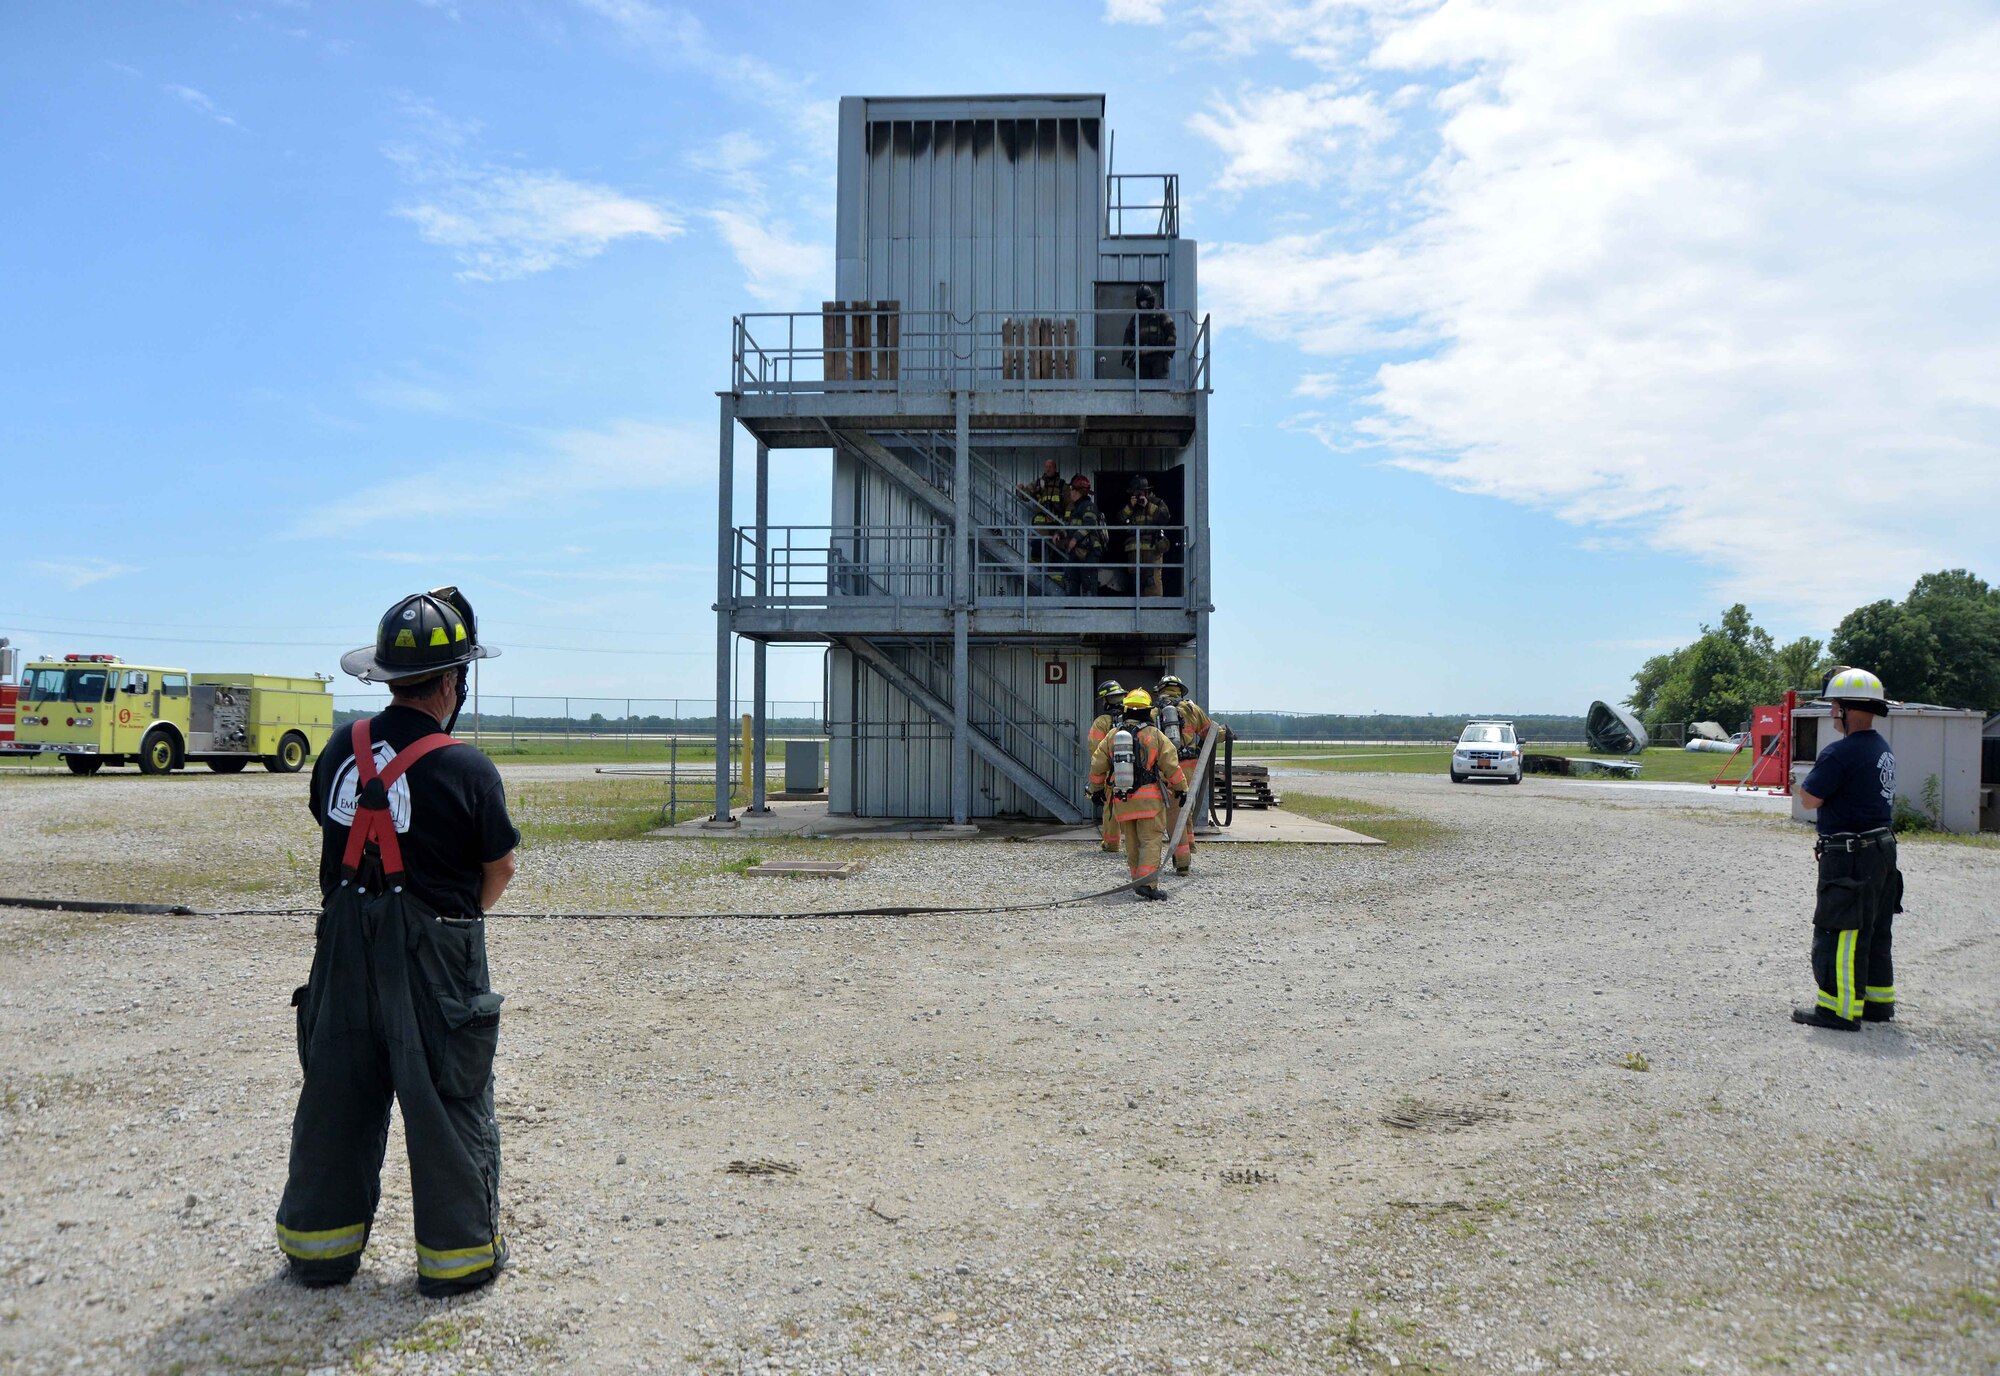 Students from Sinclair Community College's Fire Academy participate in live fire training exercises at the Fire Training exercises at the Fire Training Center at Wright-Patterson Air Force Base July 16. The students are monitored by instructors from the college and fire fighters from Wright-Patterson AFB and the local community.